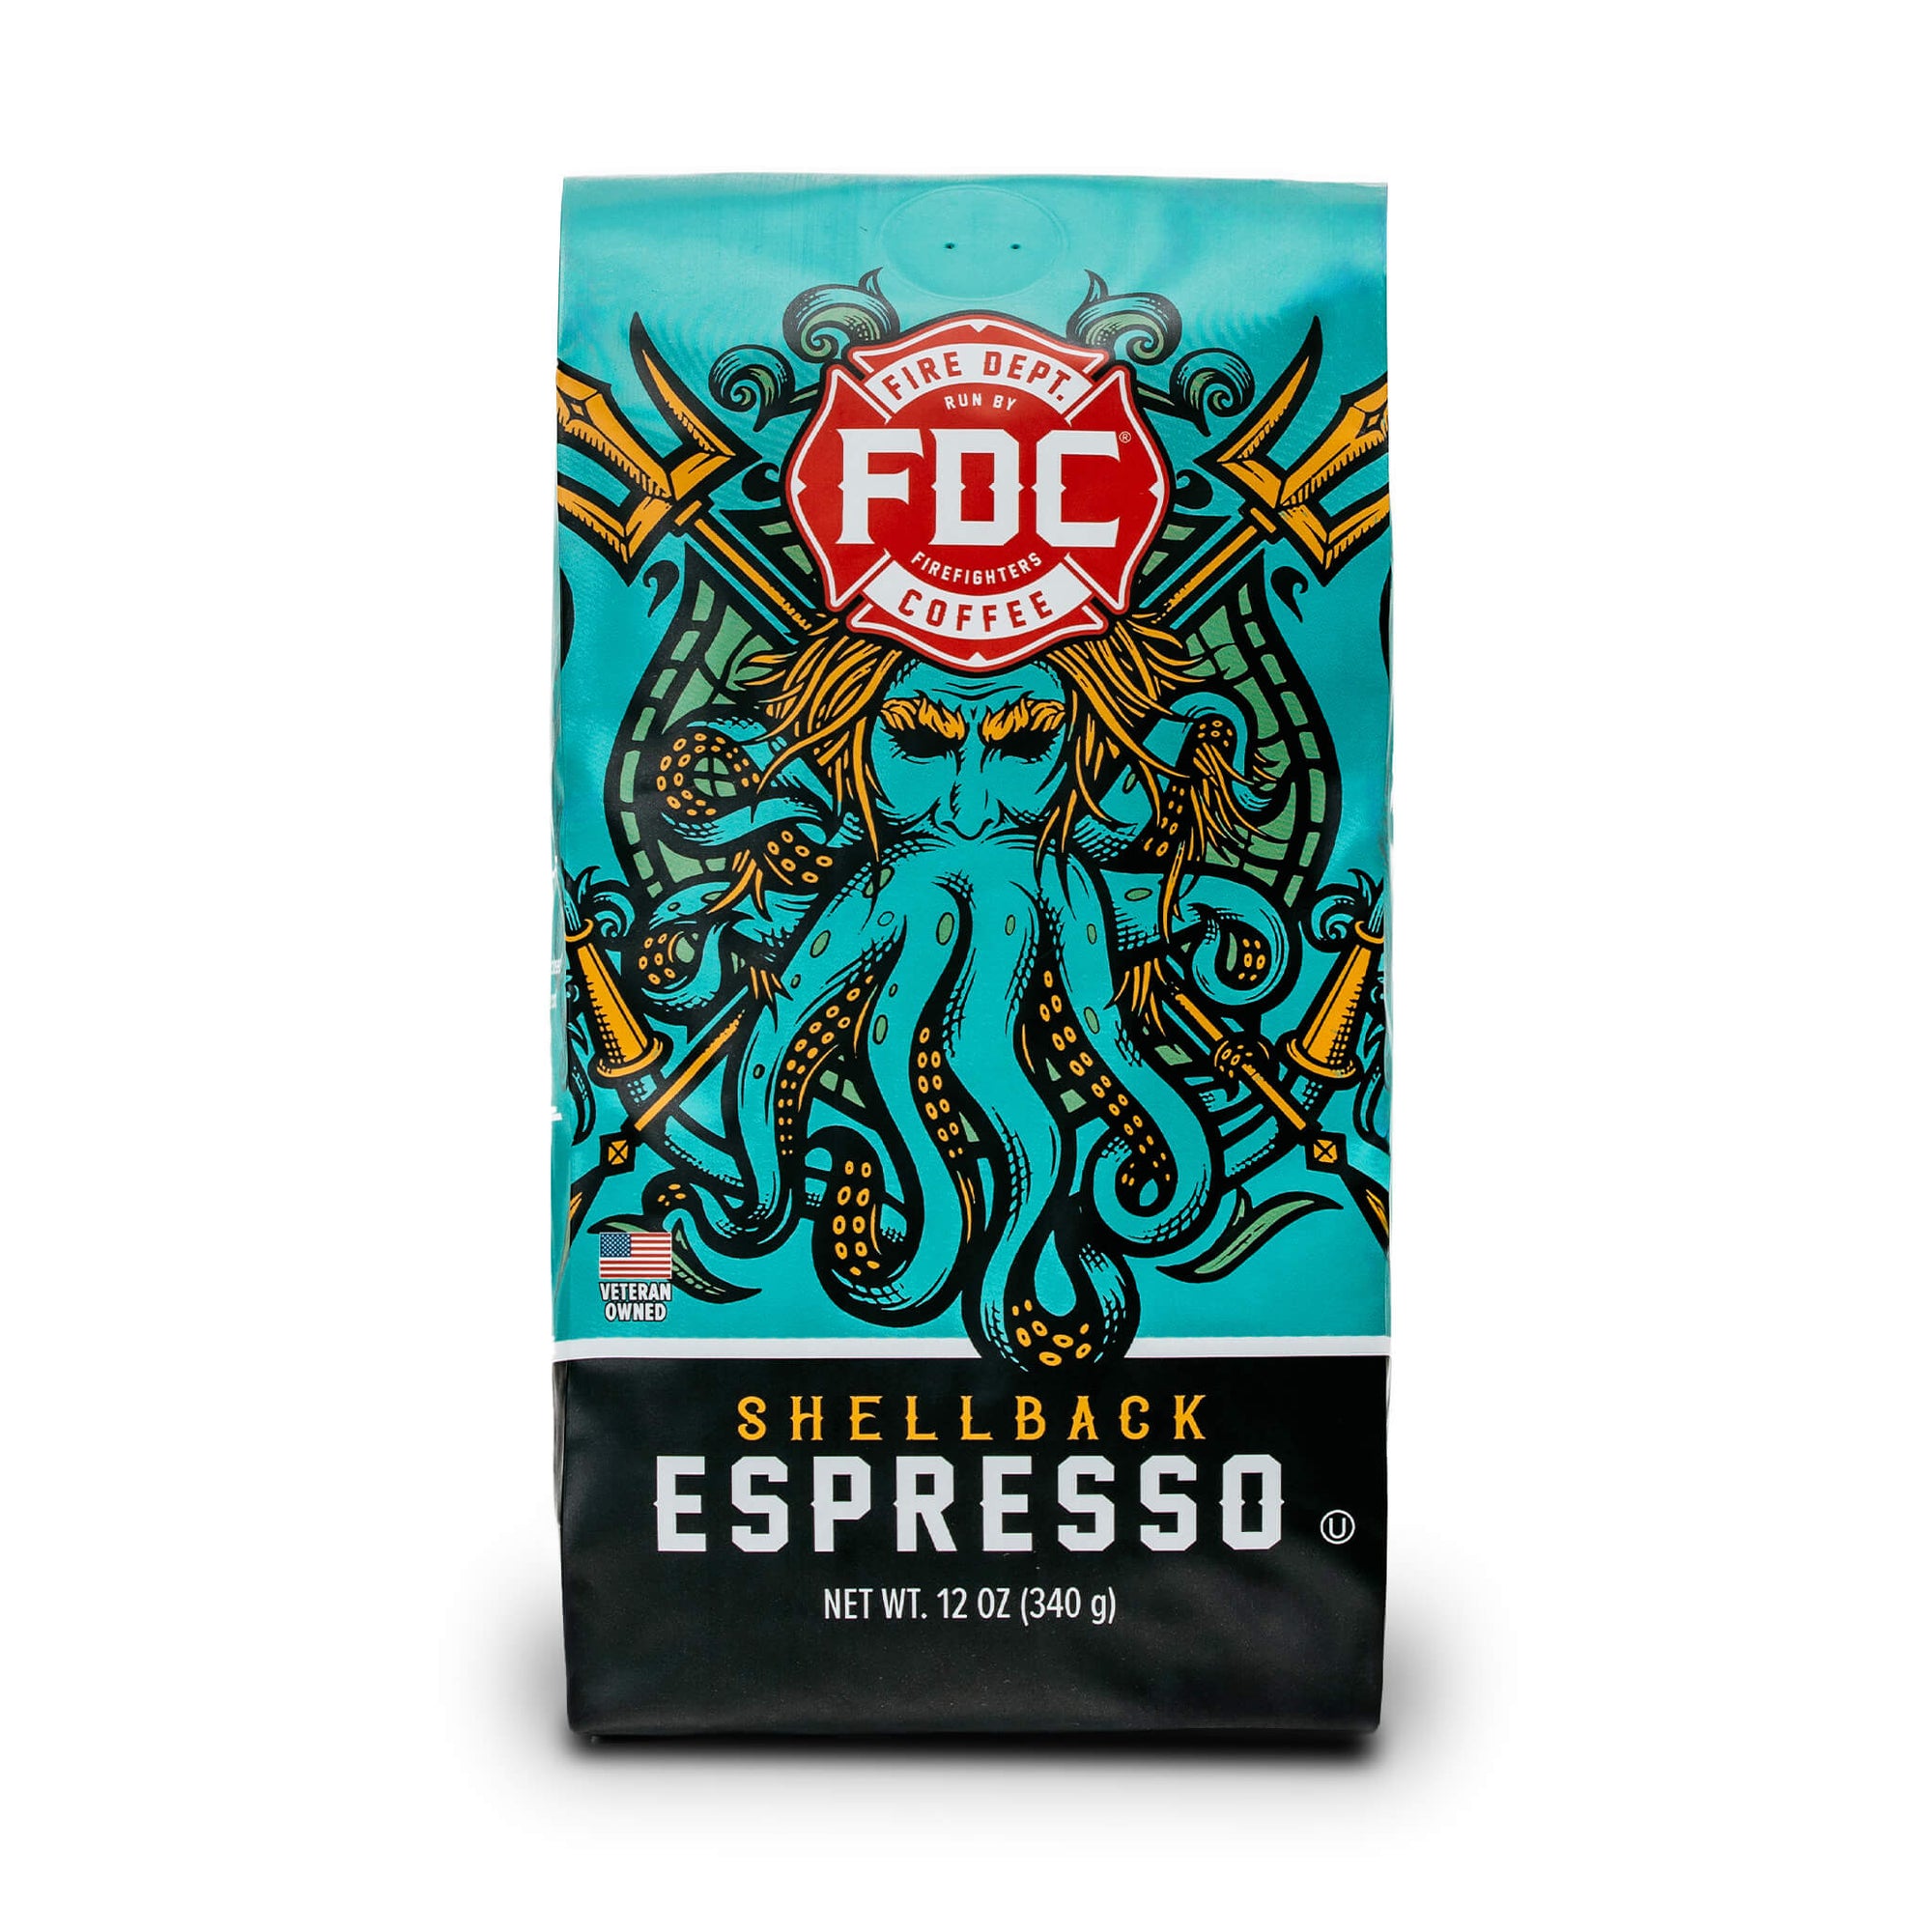 A 12-ounce package of Fire Department Coffee's Shellback Espresso Roast.